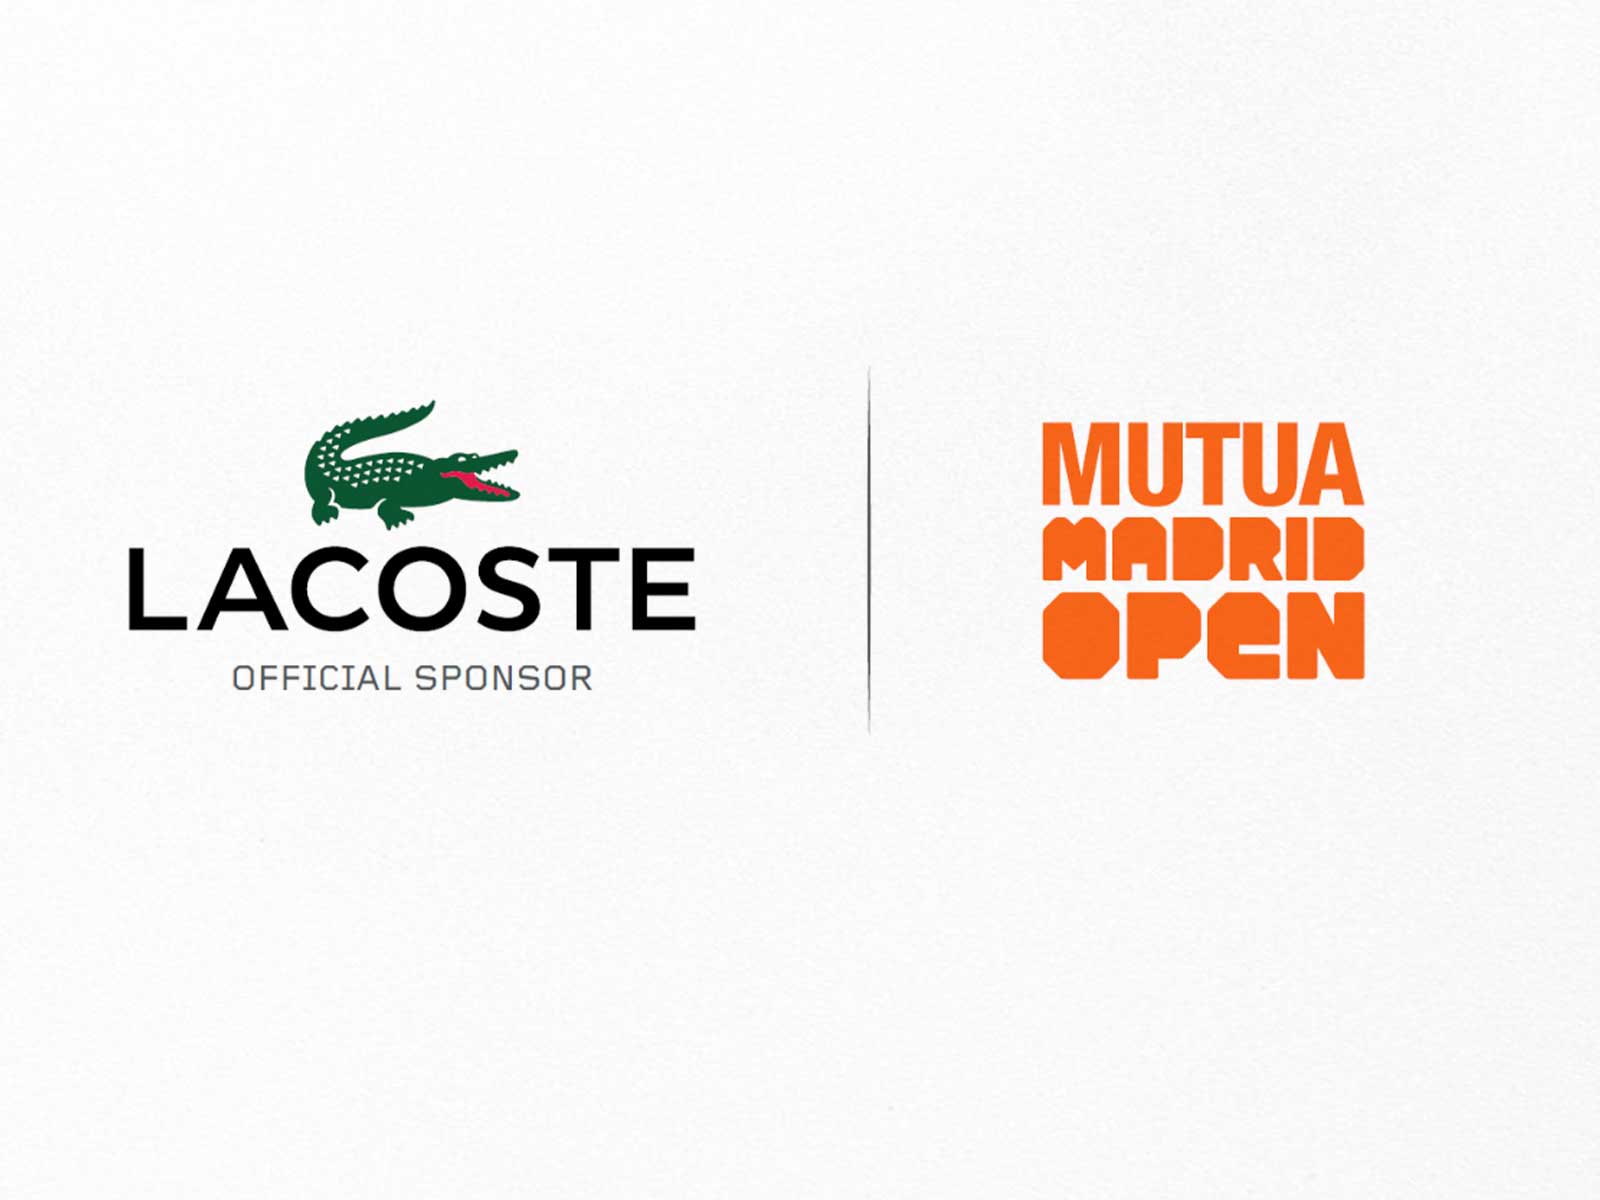 Lacoste, official partner of the Mutua Madrid Open HIGHXTAR.